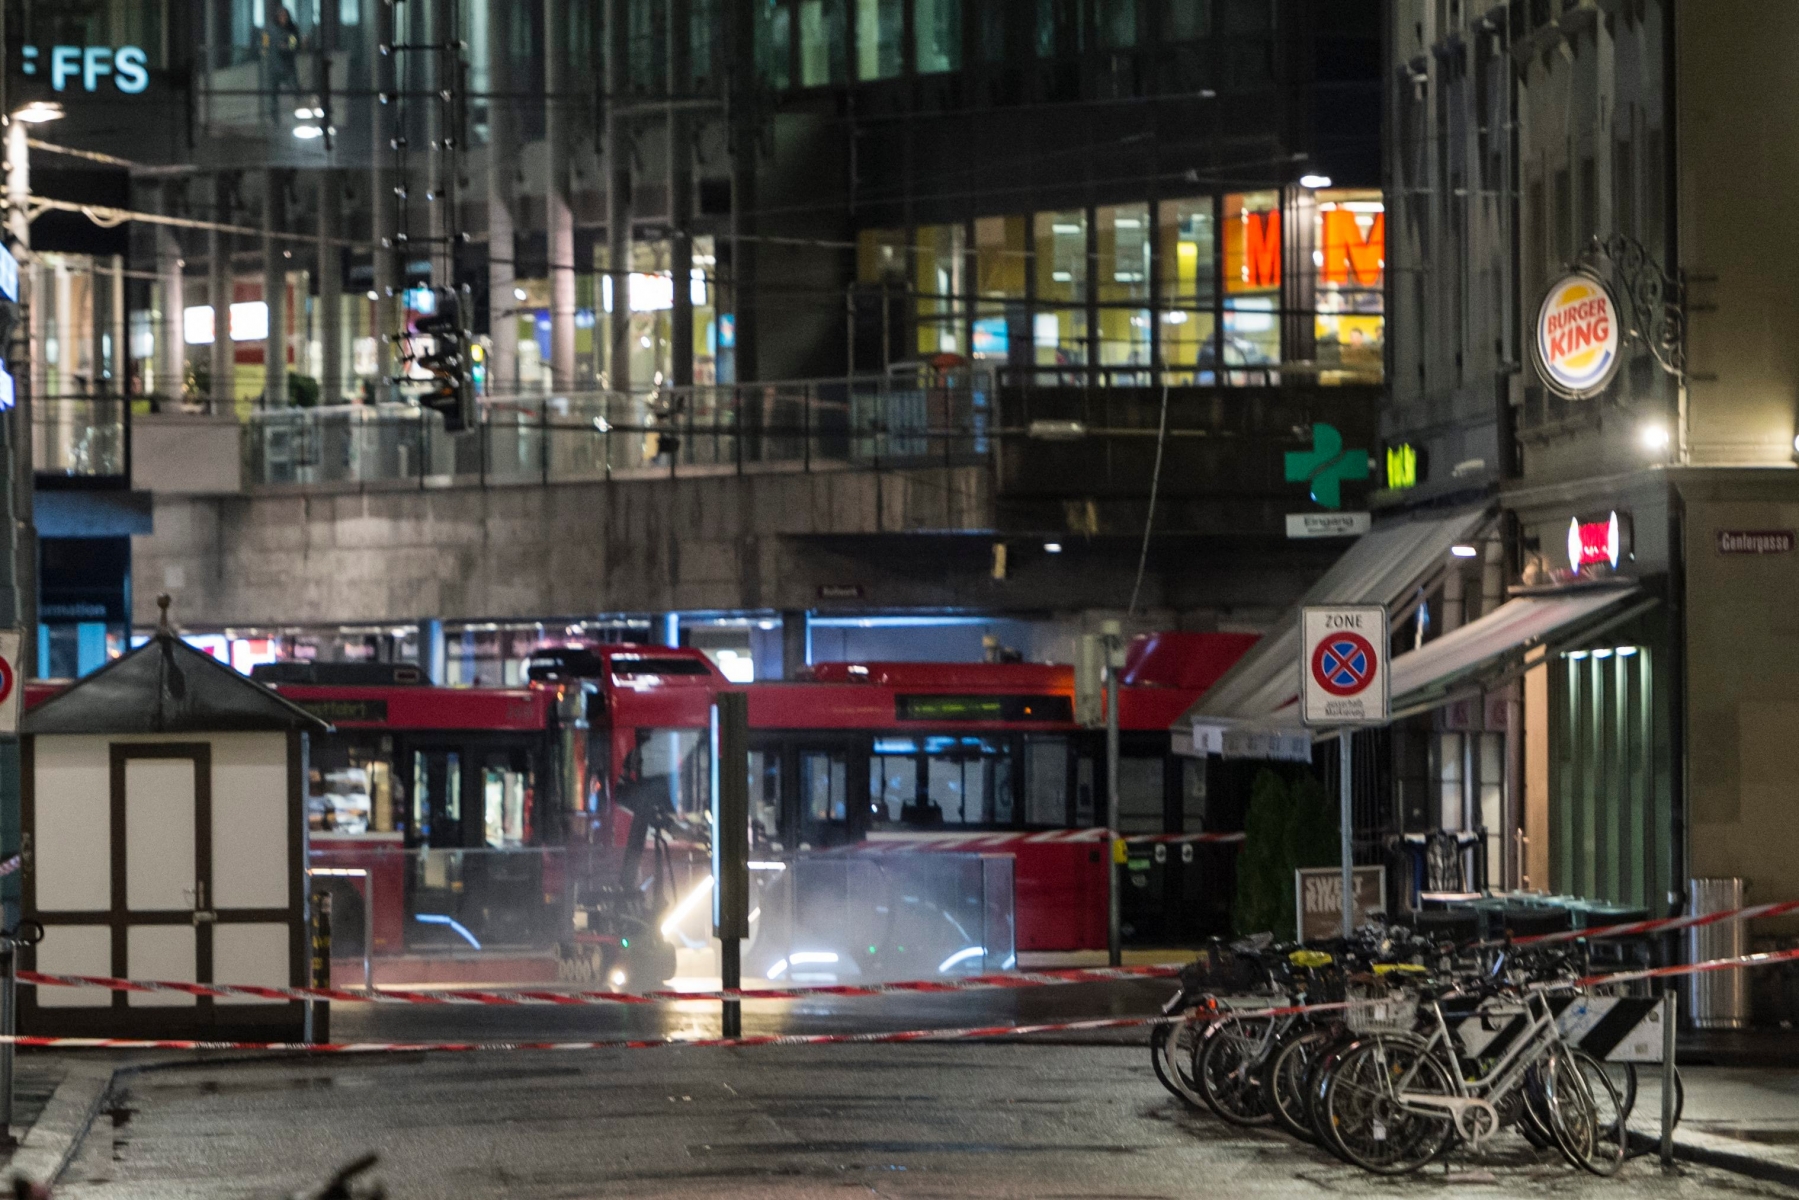 A bomb disposal robot explodes a suspicious object in an area around the central railway station in Bern, on Wednesday, November 25, 2015, in Bern, Switzerland. The suspicious object triggered a police operation at central railway station in Bern in the late afternoon of Wednesday, November 25, 2015. So far, no further information regarding the suspicious object has been released. (KEYSTONE/Dominic Steinmann) SCHWEIZ BERN HAUPTBAHNHOF BOMBENALARM